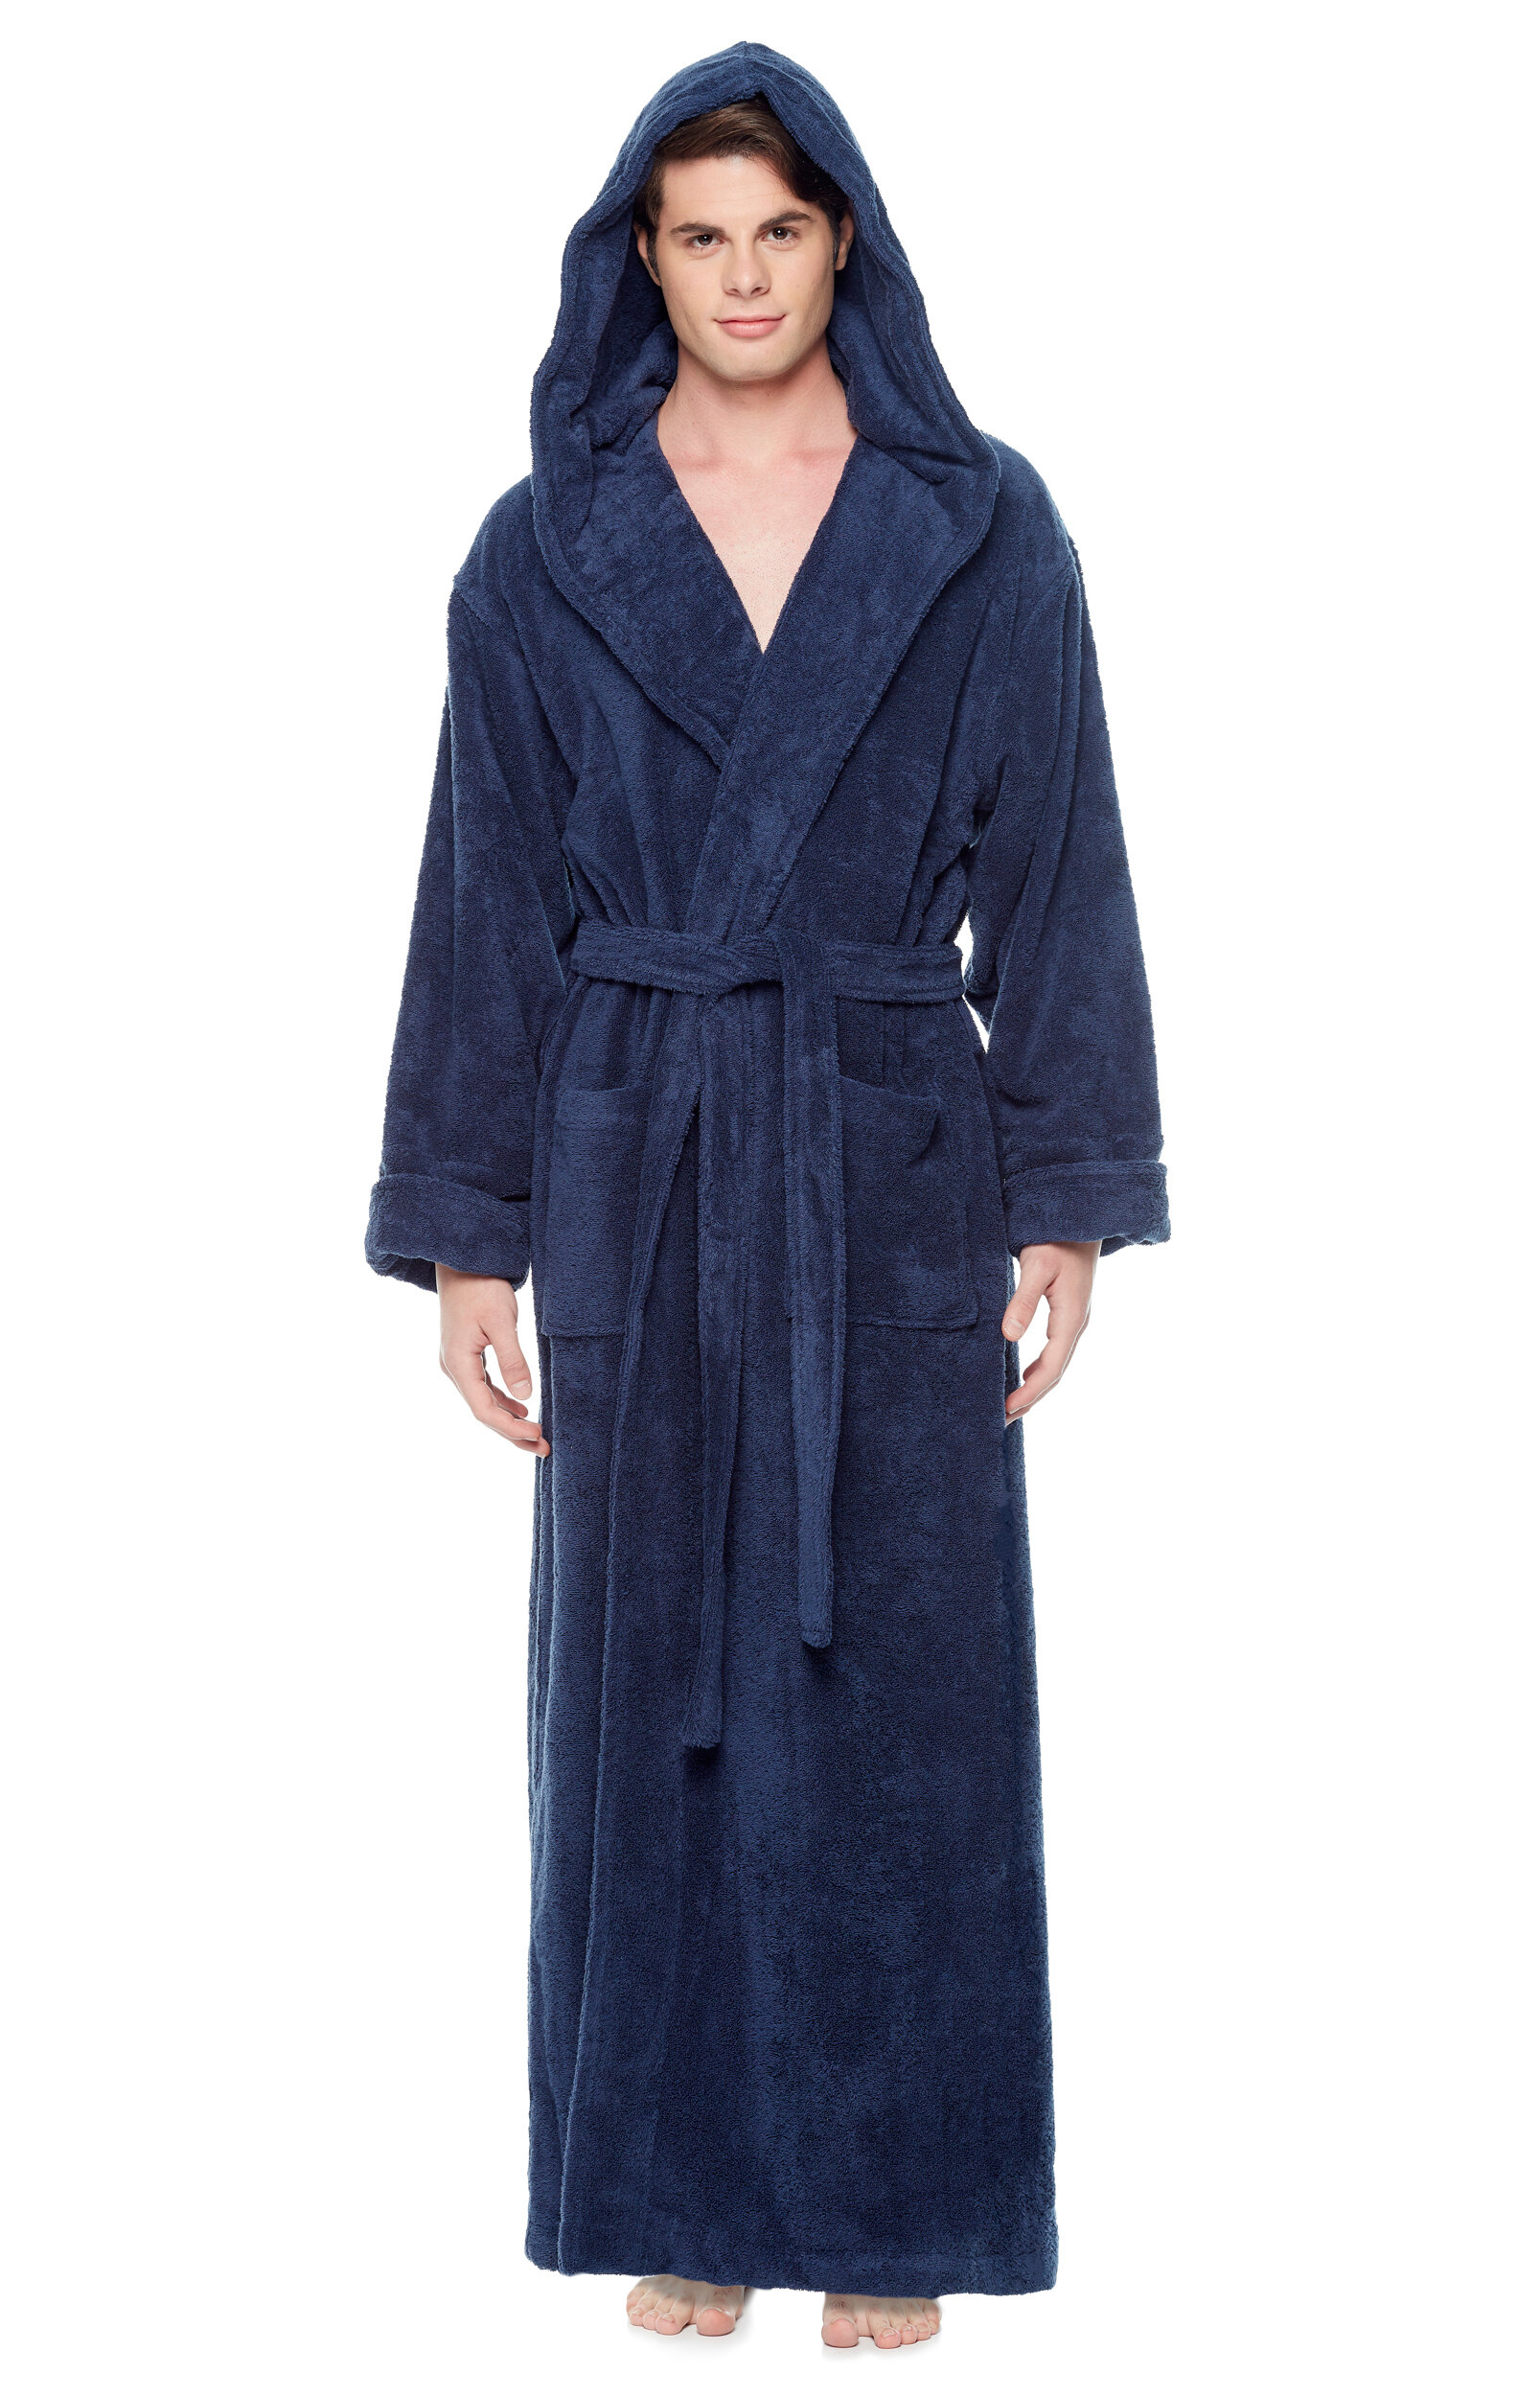 Buy AW BRIDAL Cotton Robes for Couple Grey Embroidery Terry Bathrobes  Unisex Mr and Mrs Hotel Robes Warm Long Lightgown Online at Low Prices in  India - Amazon.in